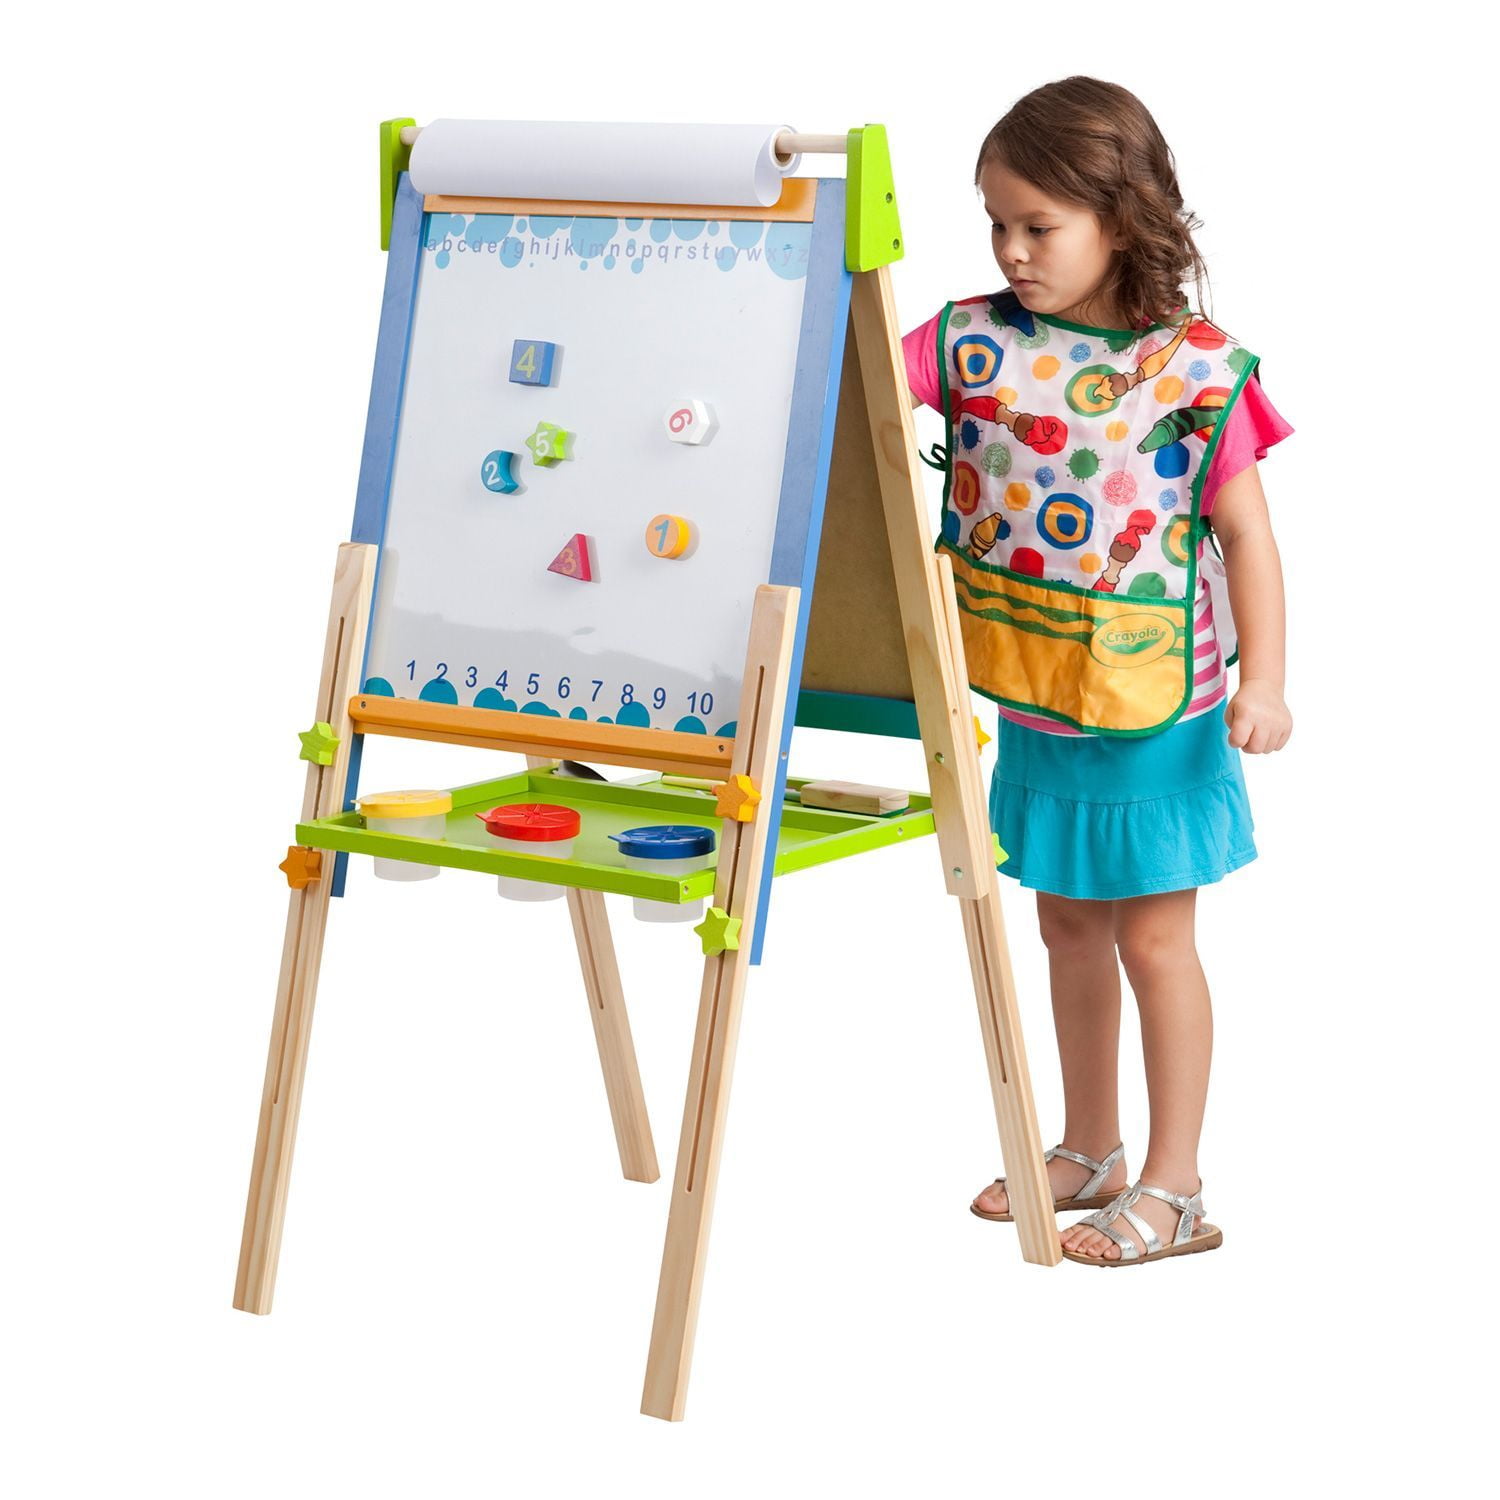 Grandink Pre Printed Canvas Easel for Kids Painting Art kit Ready to Paint   Perfect Unique Creative Gift for Creative Mind [Printed, Pack of 5] :  .in: Office Products